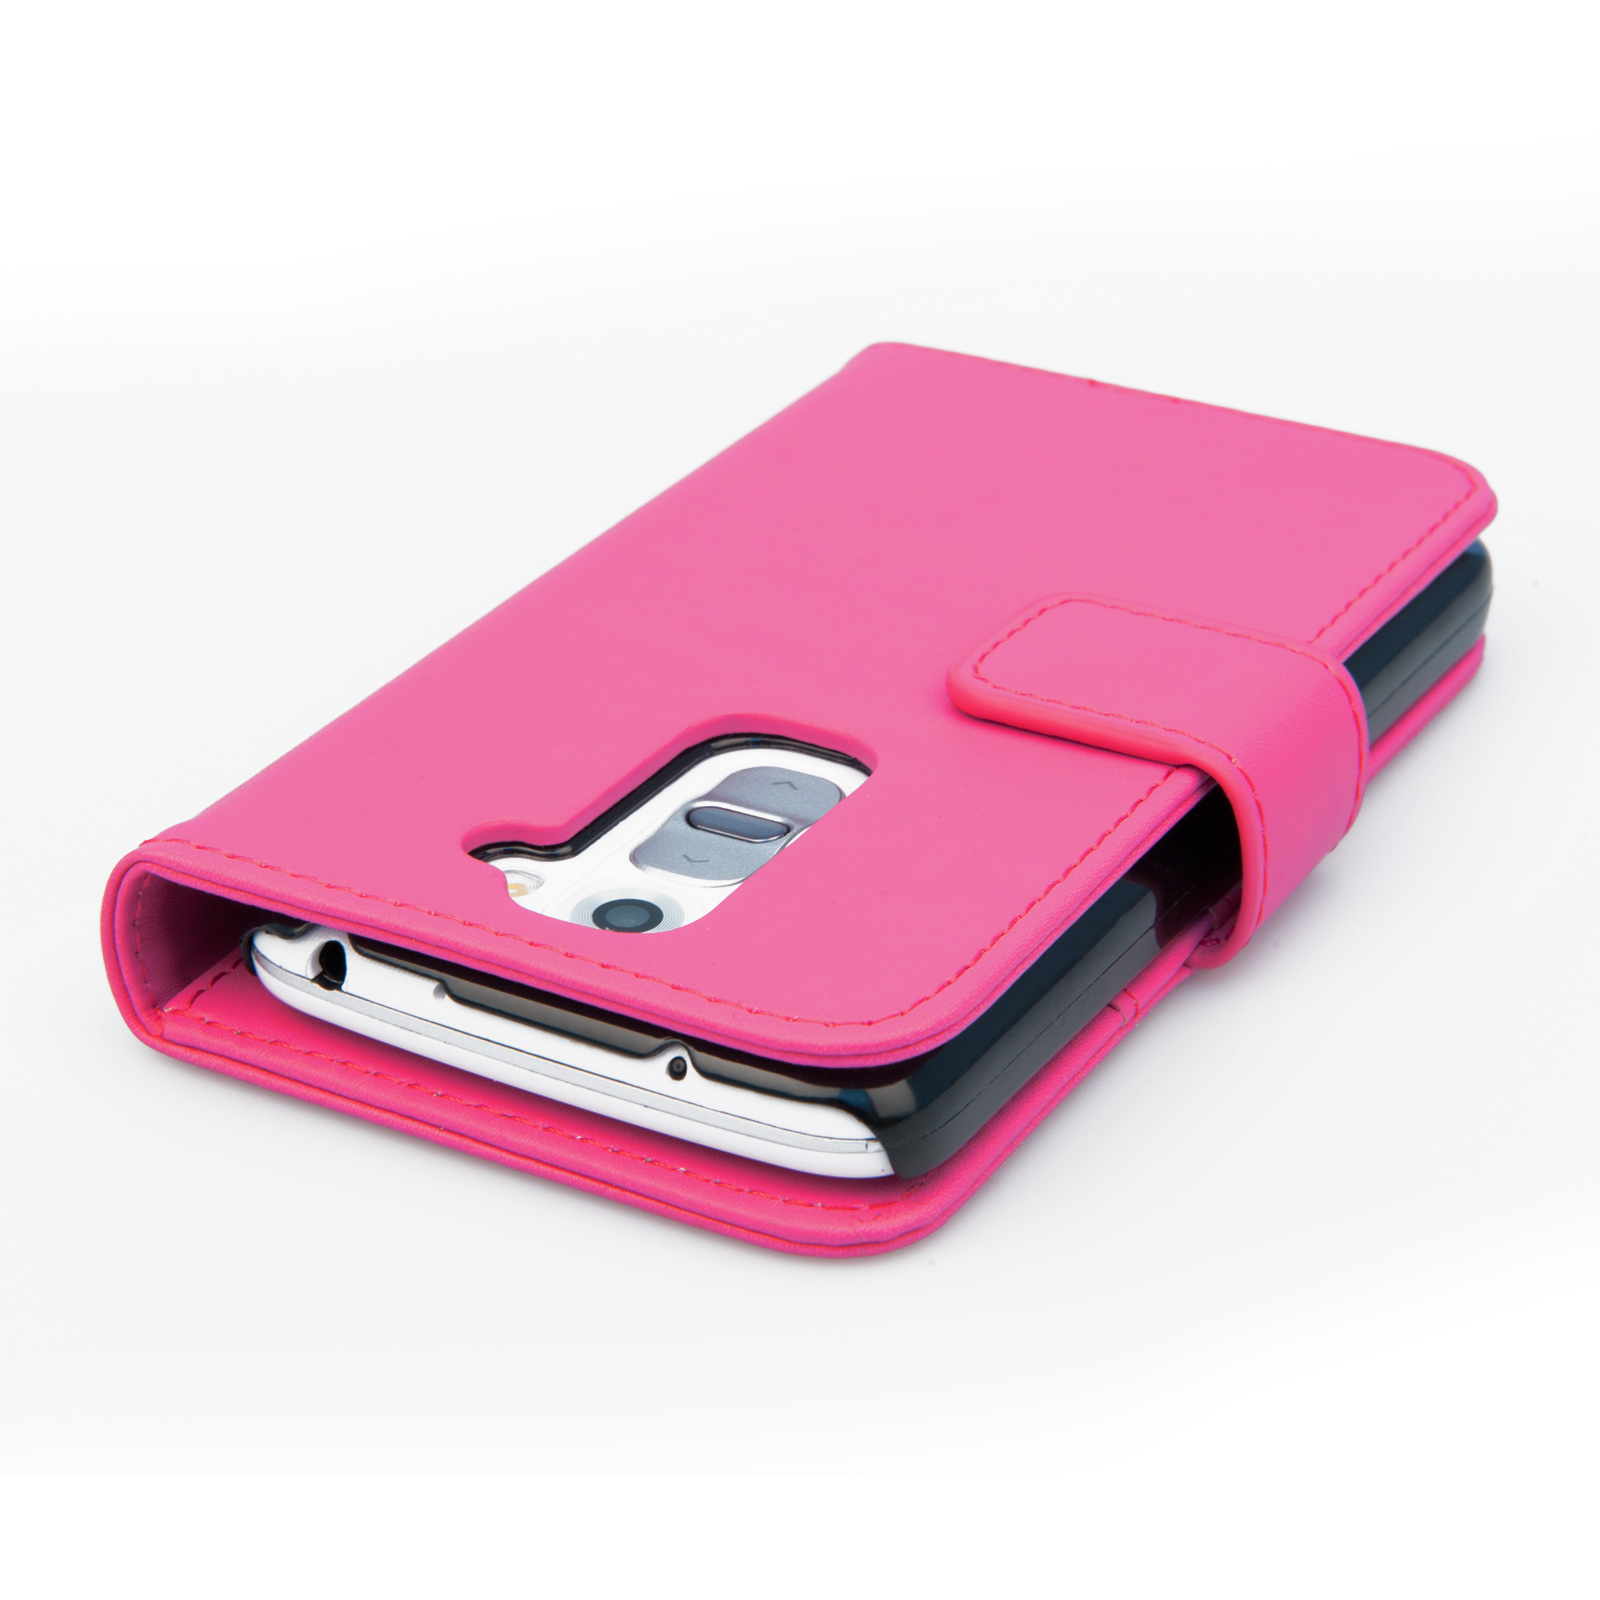 YouSave Accessories LG G2 Mini Leather-Effect Wallet Case - Hot Pink